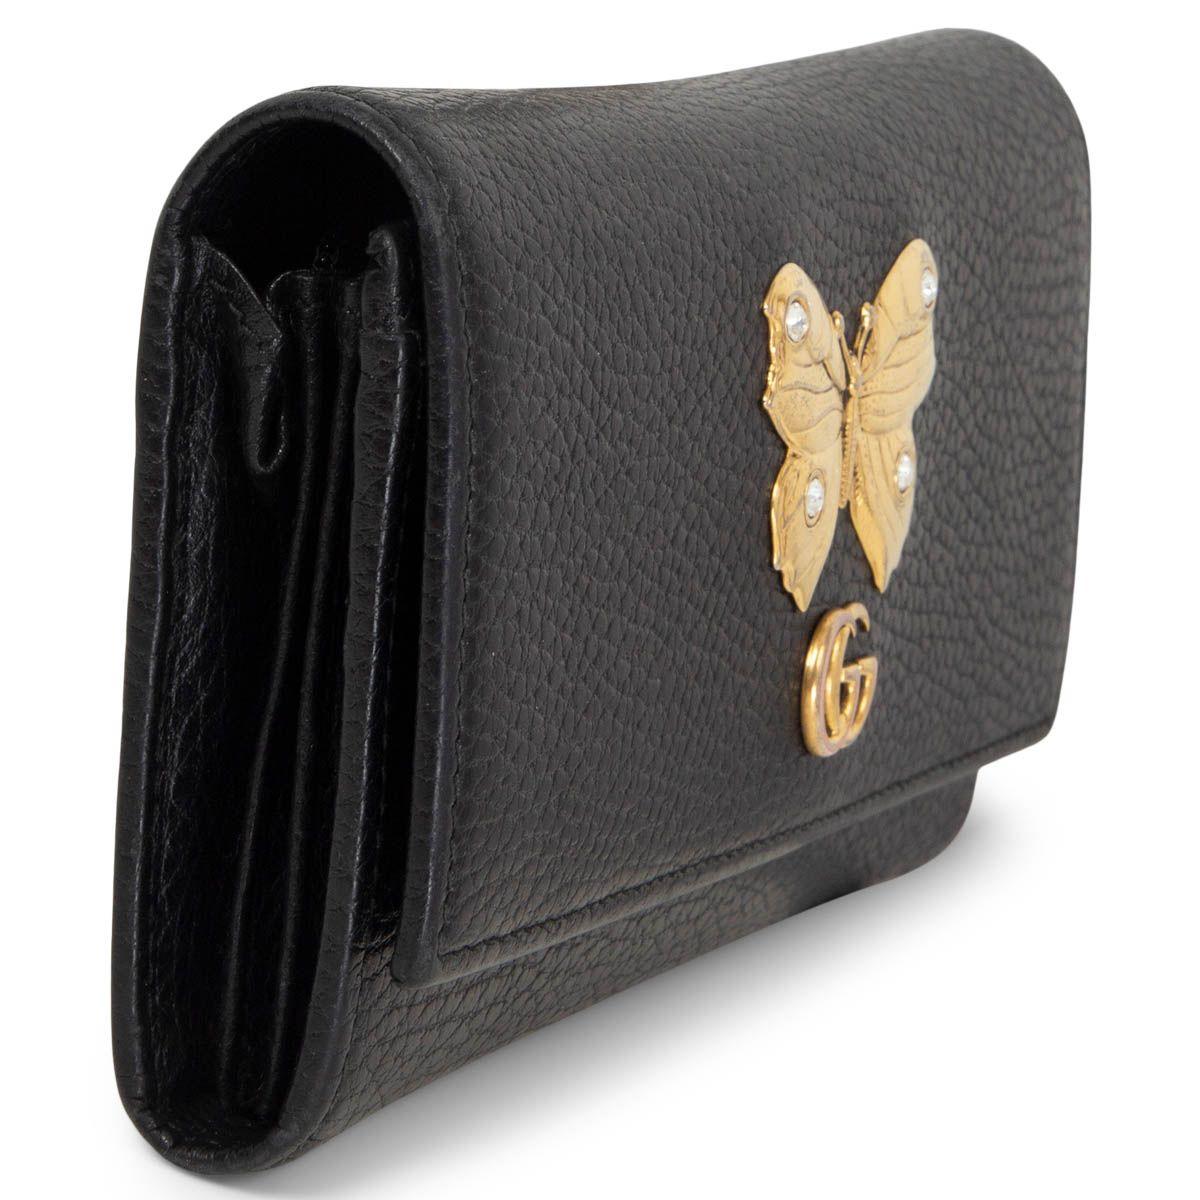 100% authentic Gucci Butterfly Continental wallet in black grained calfskin embellished with a gold-tone metal butterfly with crystals on the wings and GG logo. Opens with a push button and is lined in black calfskin and nylon with 12 credit card